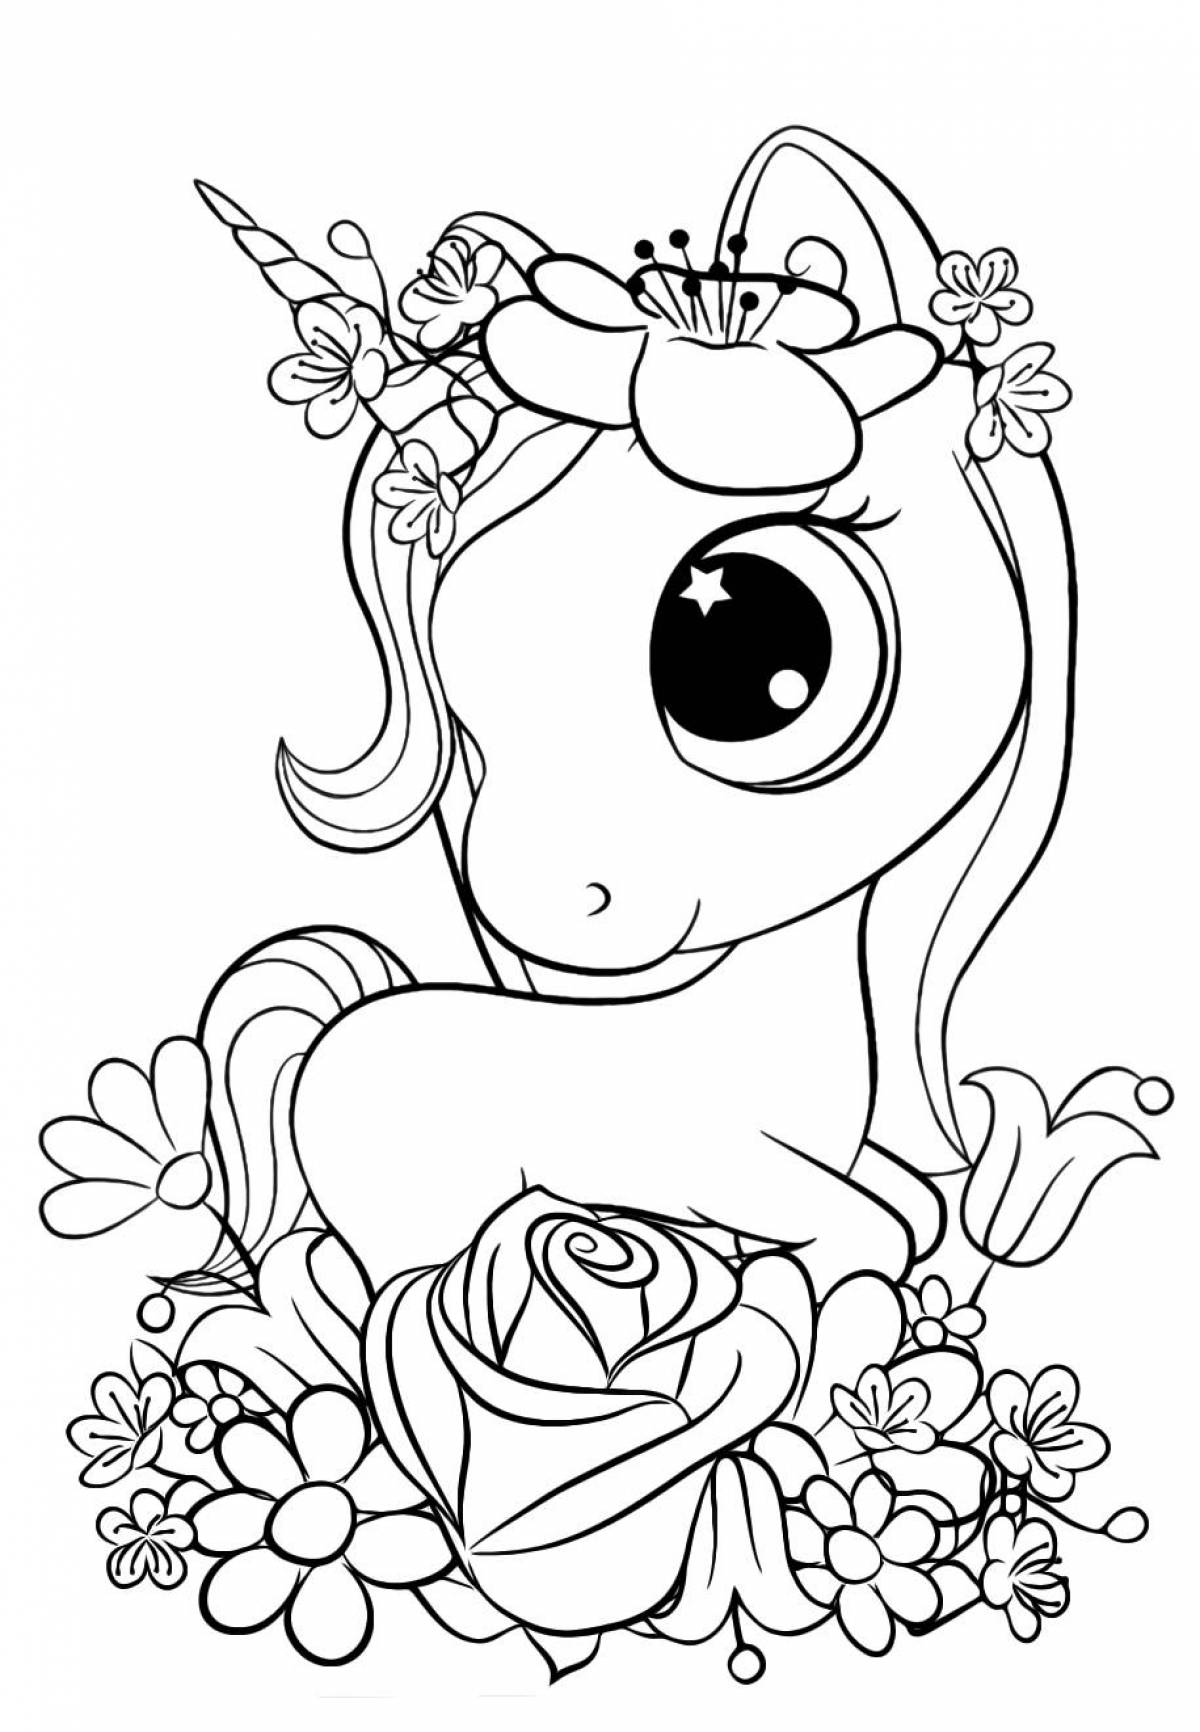 Delightful coloring pages beautiful animals